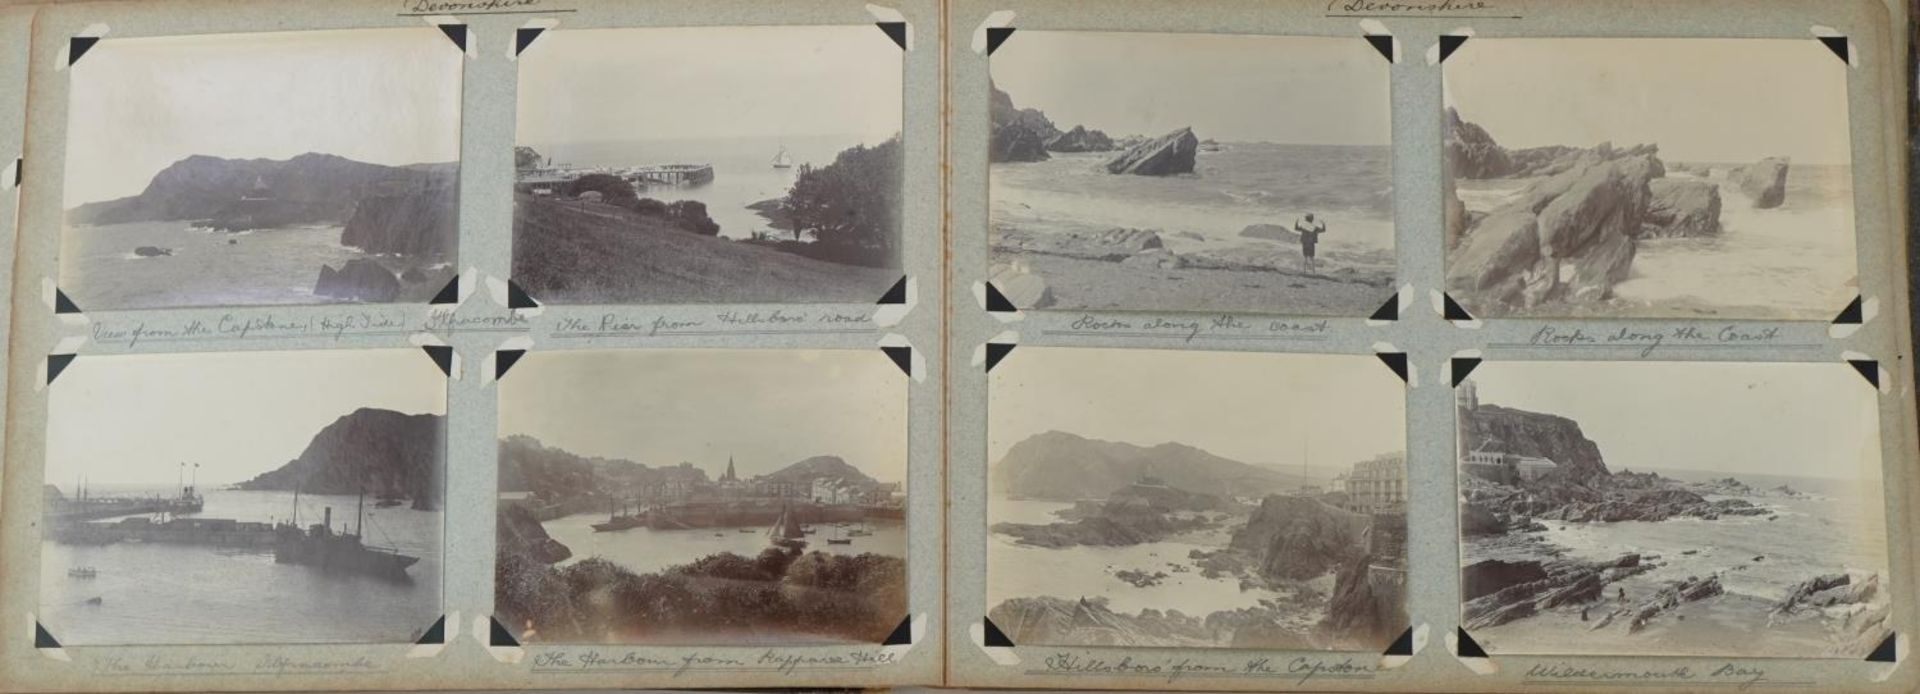 Early 20th century black and white photographs relating to the Isle of Man arranged in an album - Image 17 of 28